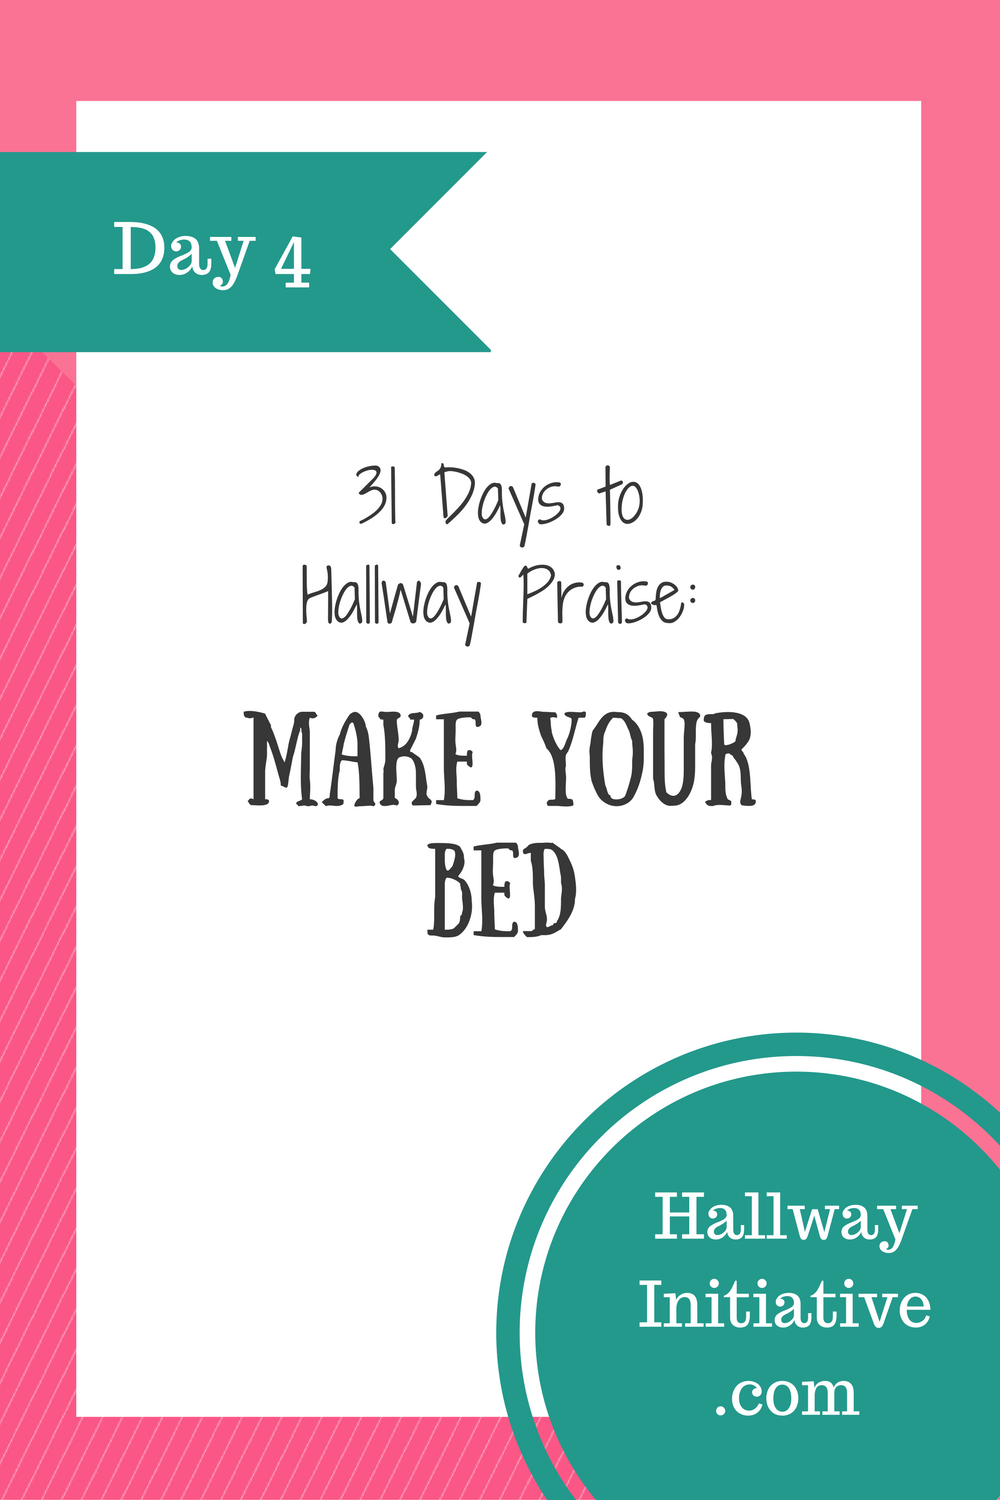 Day 4: make your bed